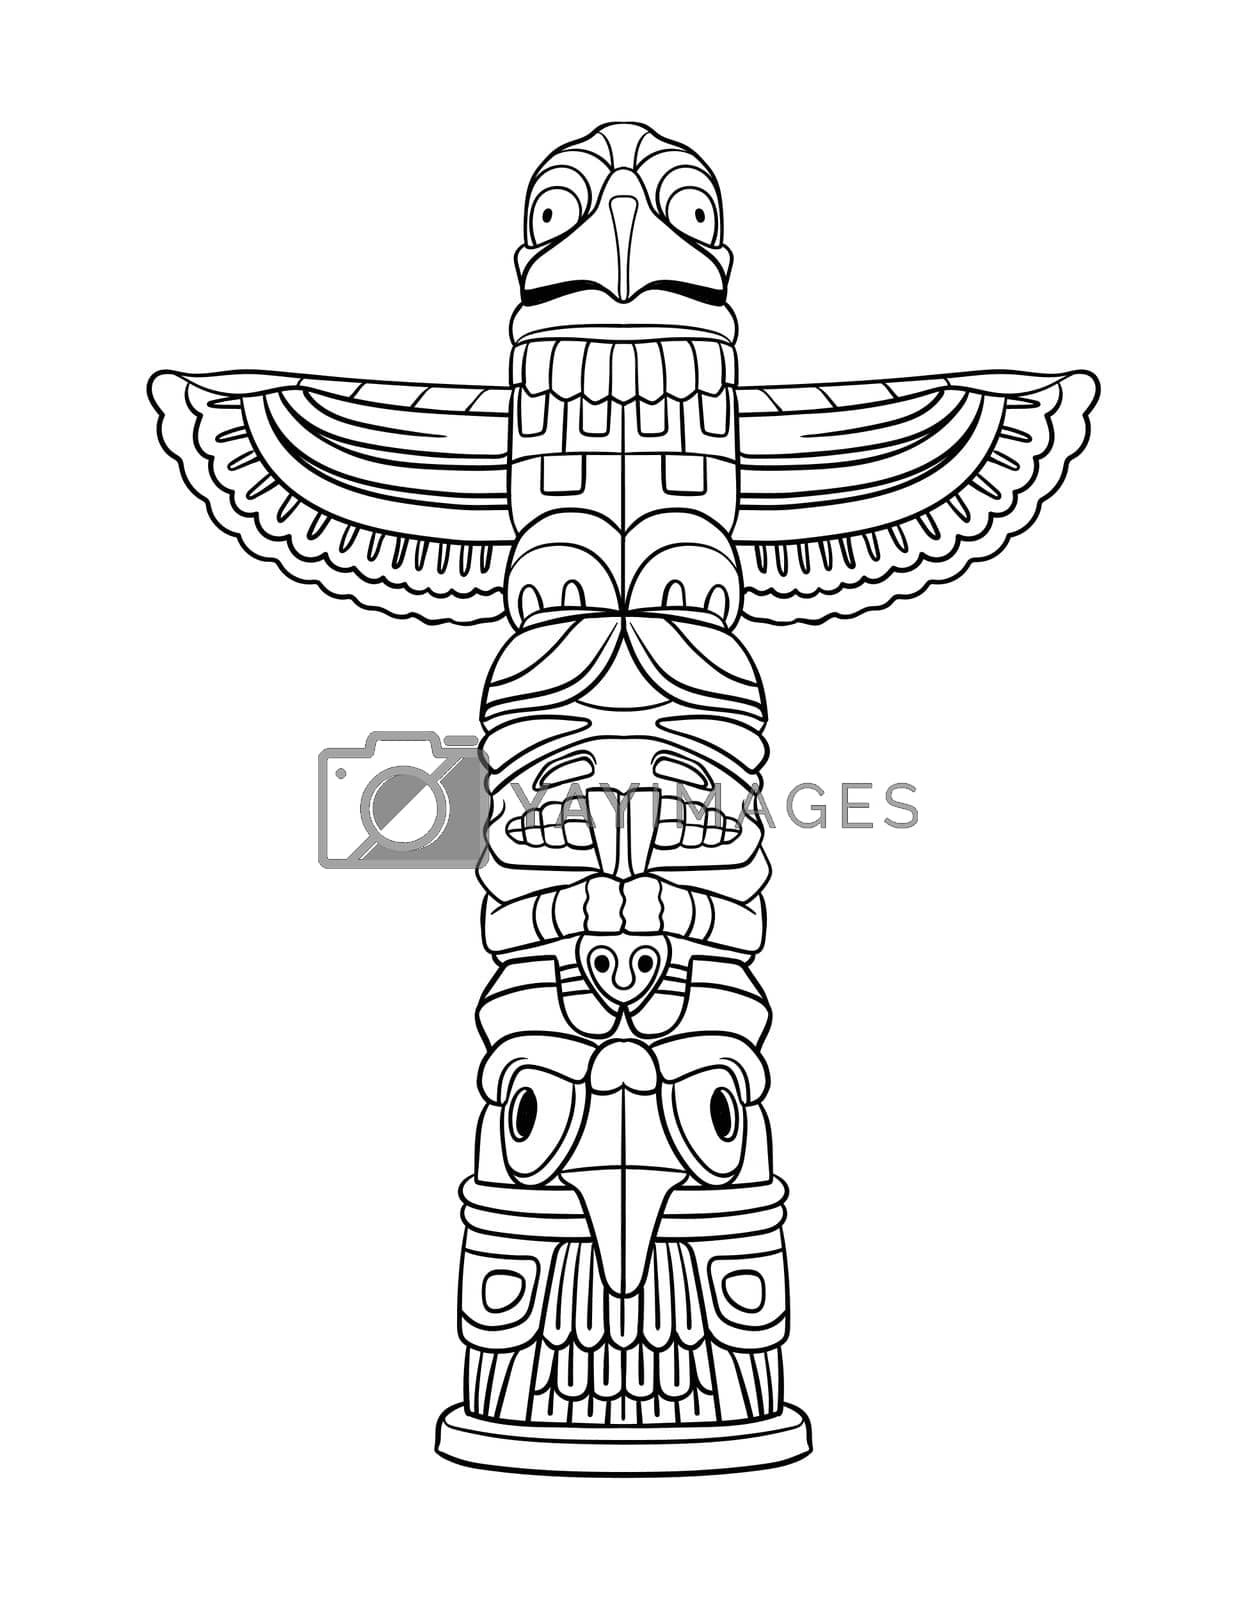 Royalty free image of Native American Indian Totem Isolated Coloring by abbydesign